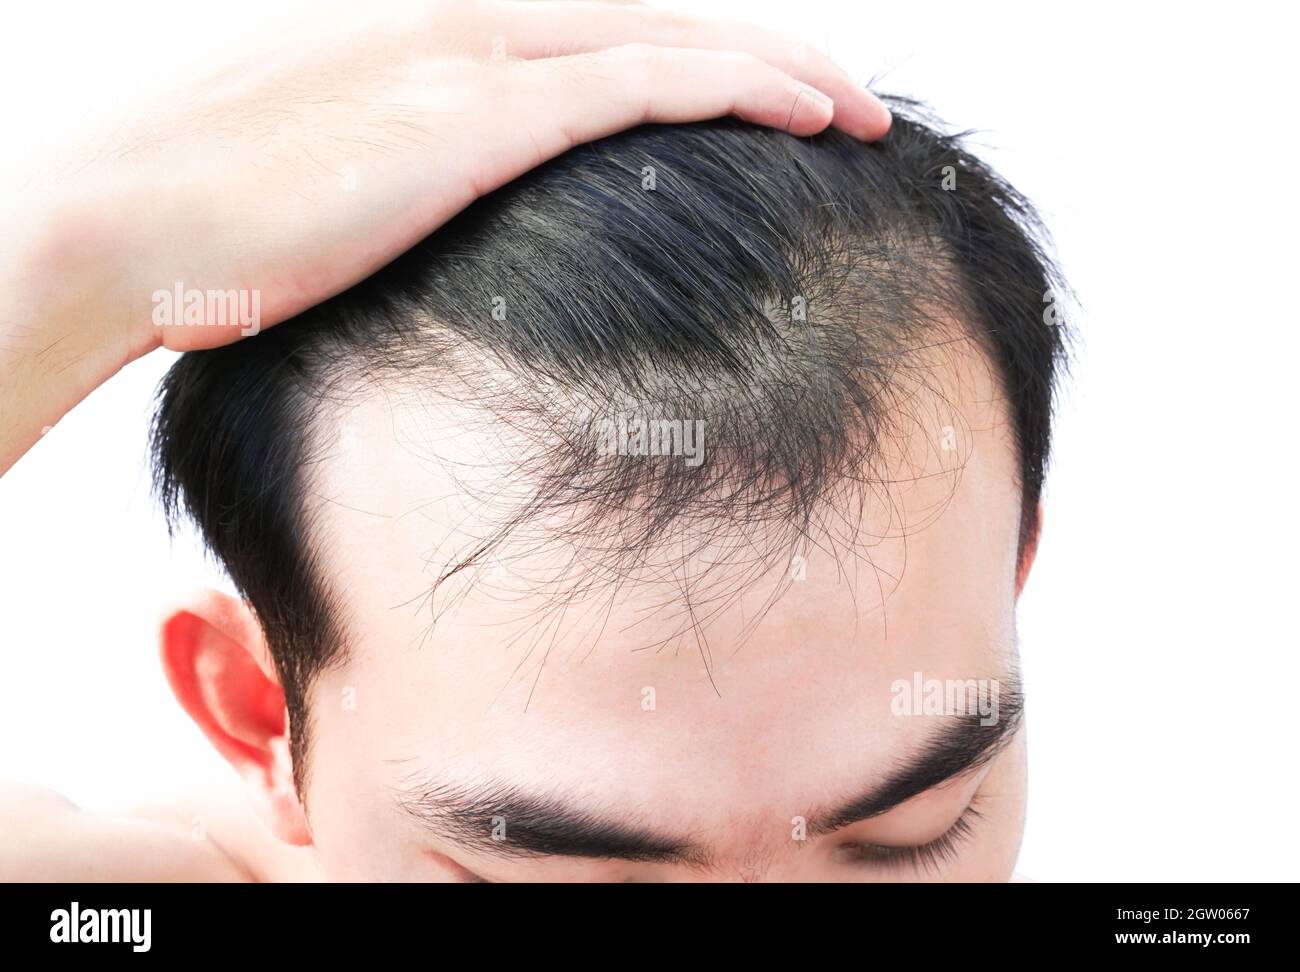 Close-up Of Man With Black Hair Over White Background Stock Photo